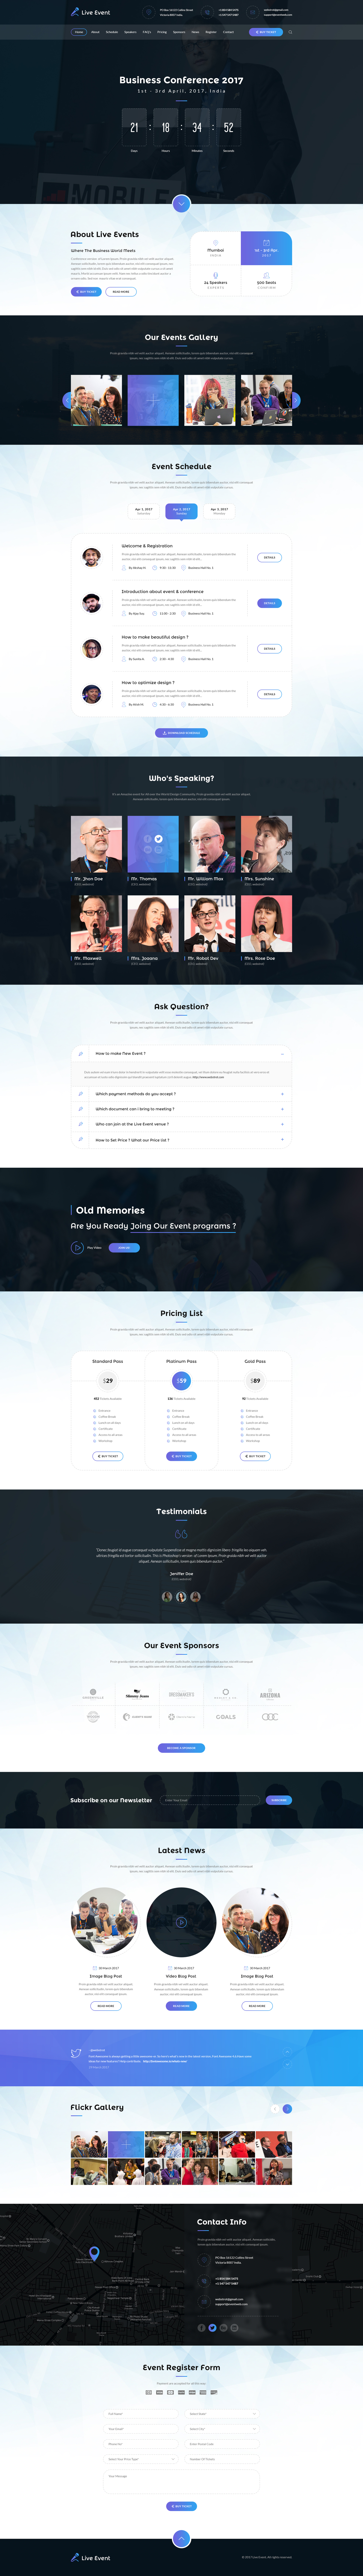 Live Event - Conference, Event & Meetup PSD Template 